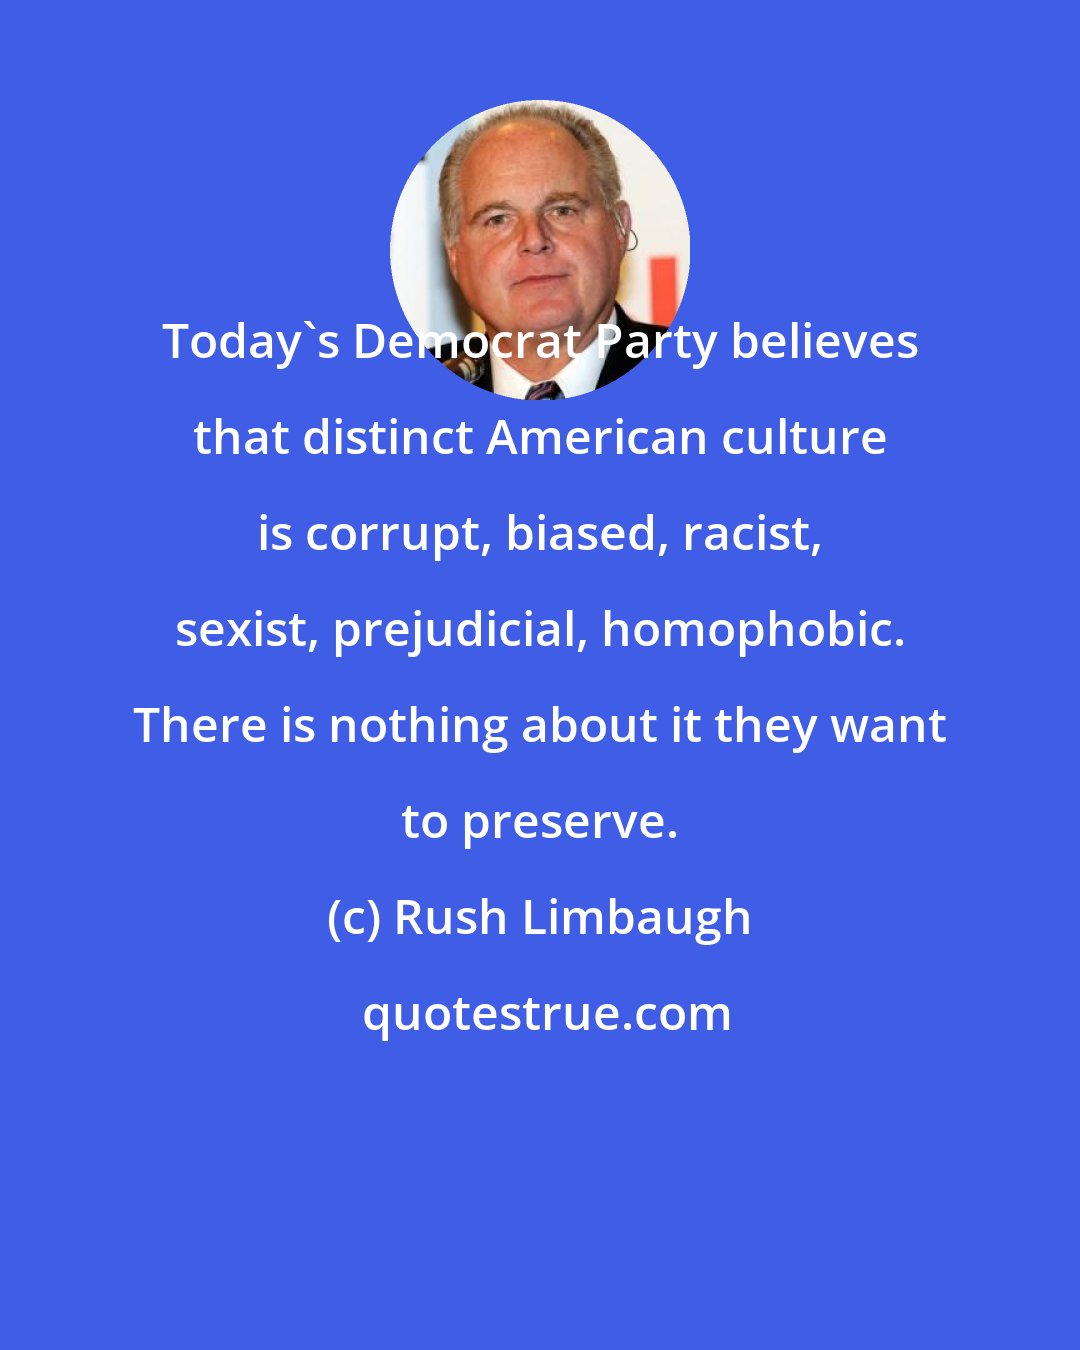 Rush Limbaugh: Today's Democrat Party believes that distinct American culture is corrupt, biased, racist, sexist, prejudicial, homophobic. There is nothing about it they want to preserve.